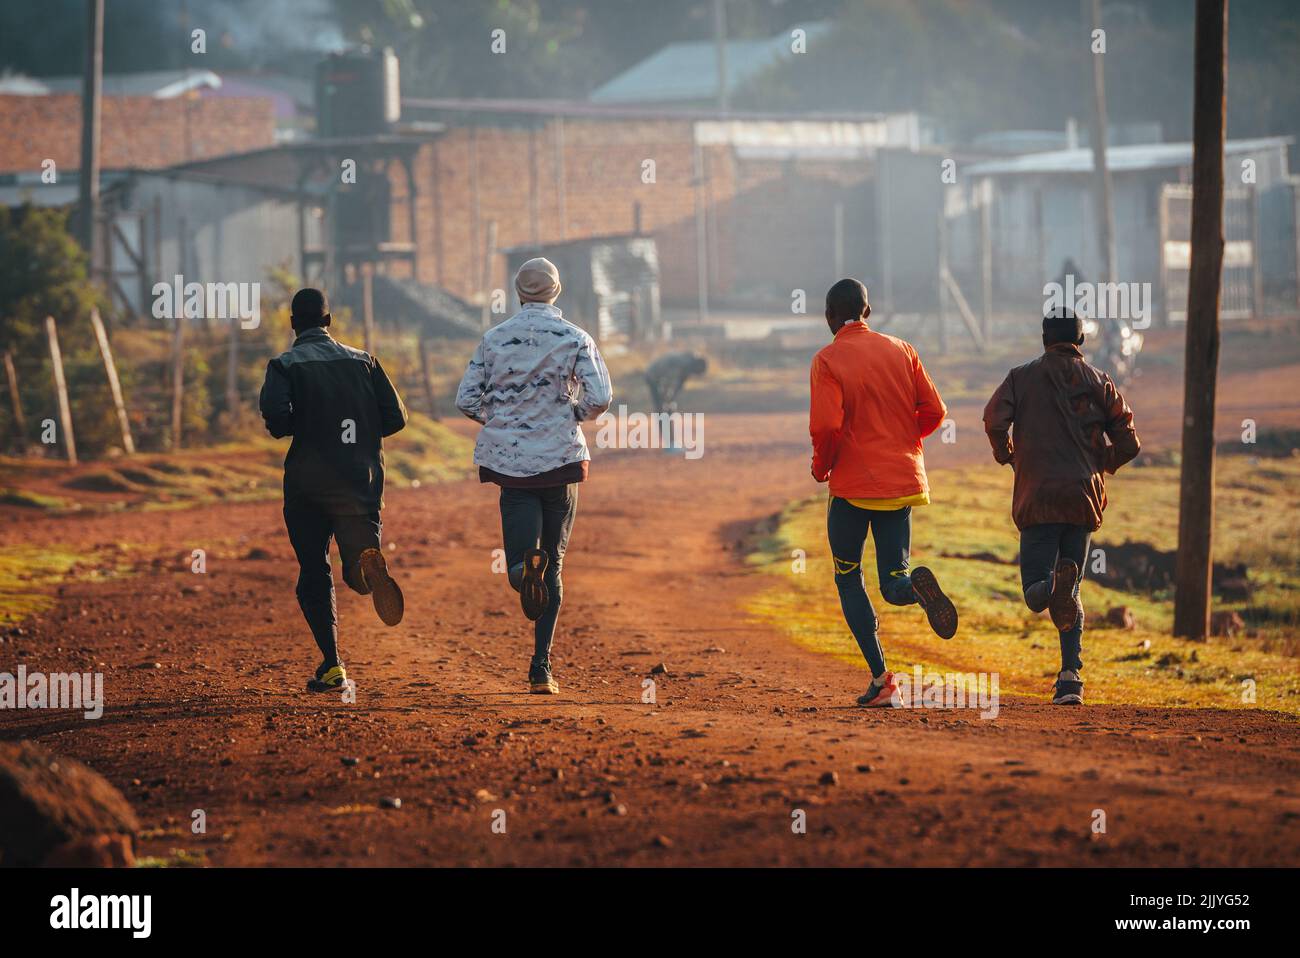 Running training in Kenya. A group of Kenyan runners prepare for a marathon and run on red soil. Marathon running, Track and Field. Simple sports life Stock Photo